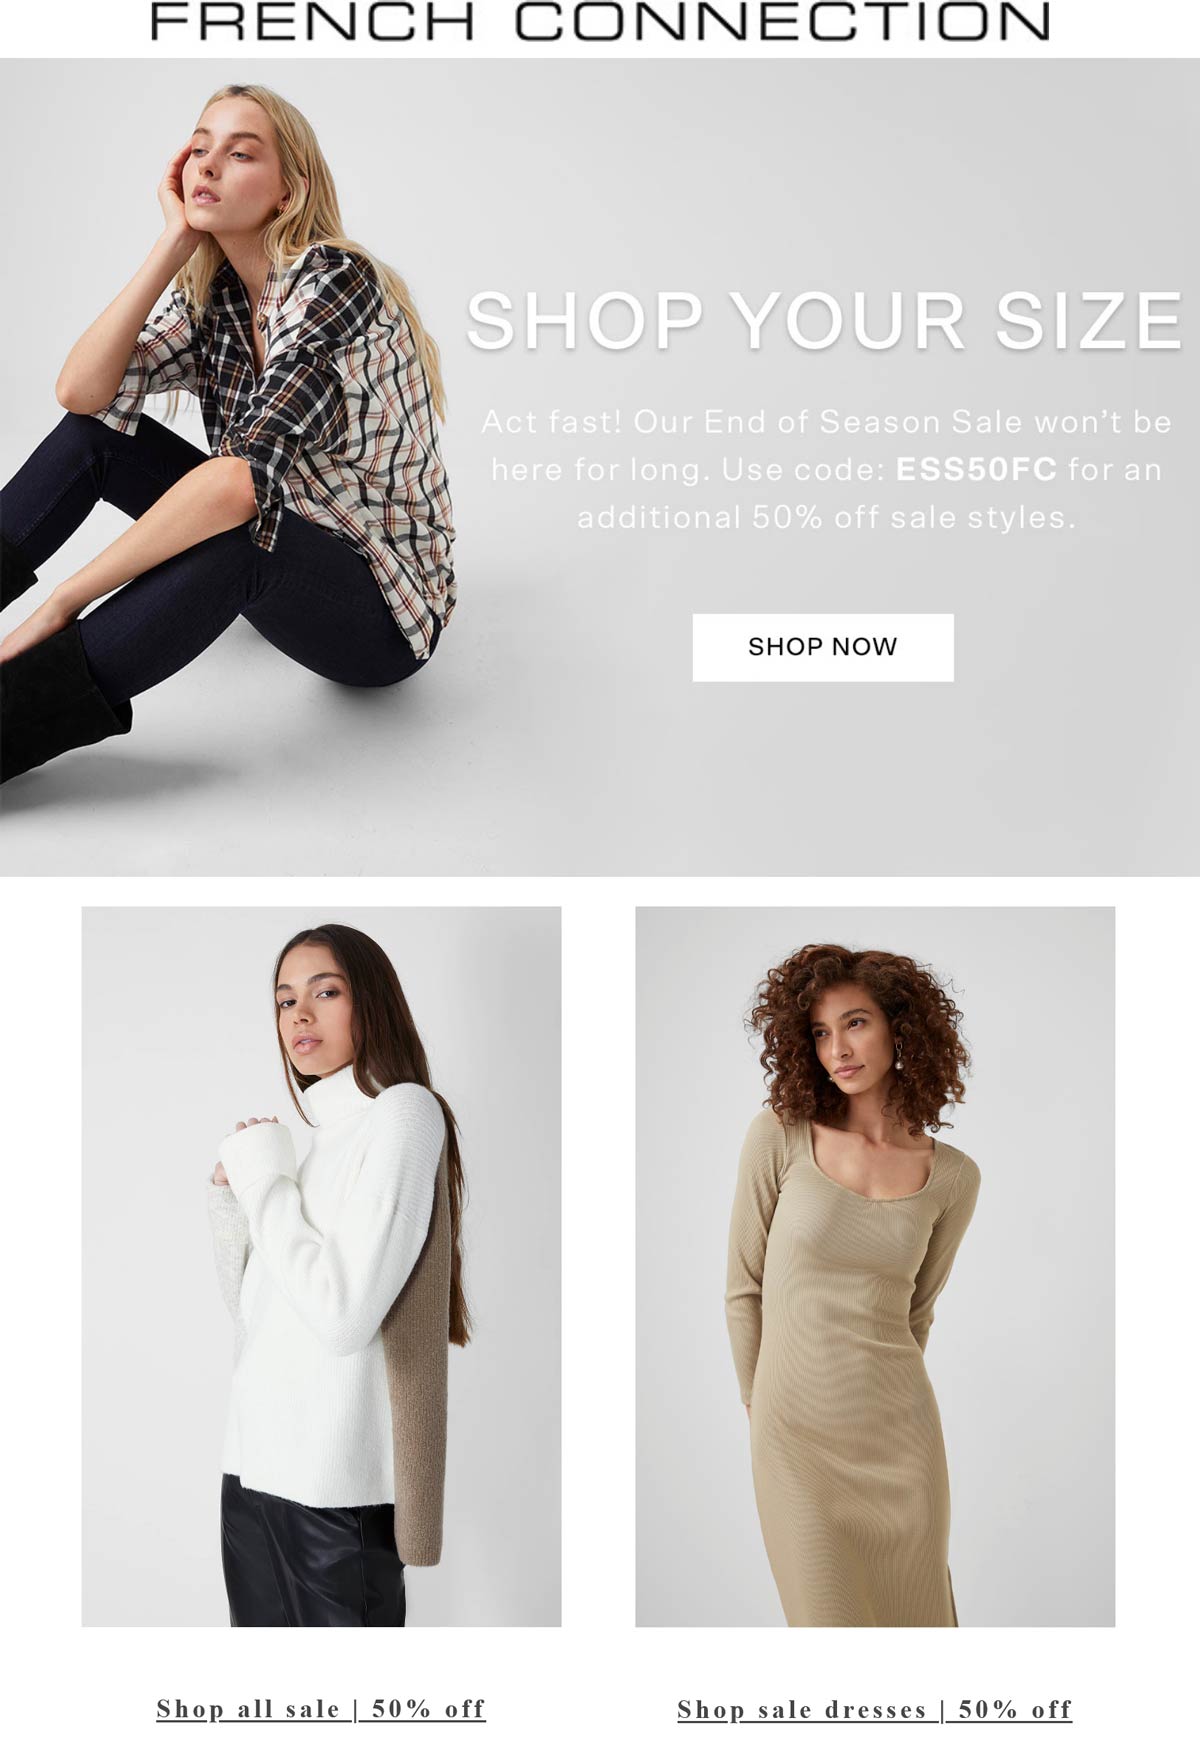 French Connection stores Coupon  Extra 50% off sale items at French Connection via promo code ESS50FC #frenchconnection 